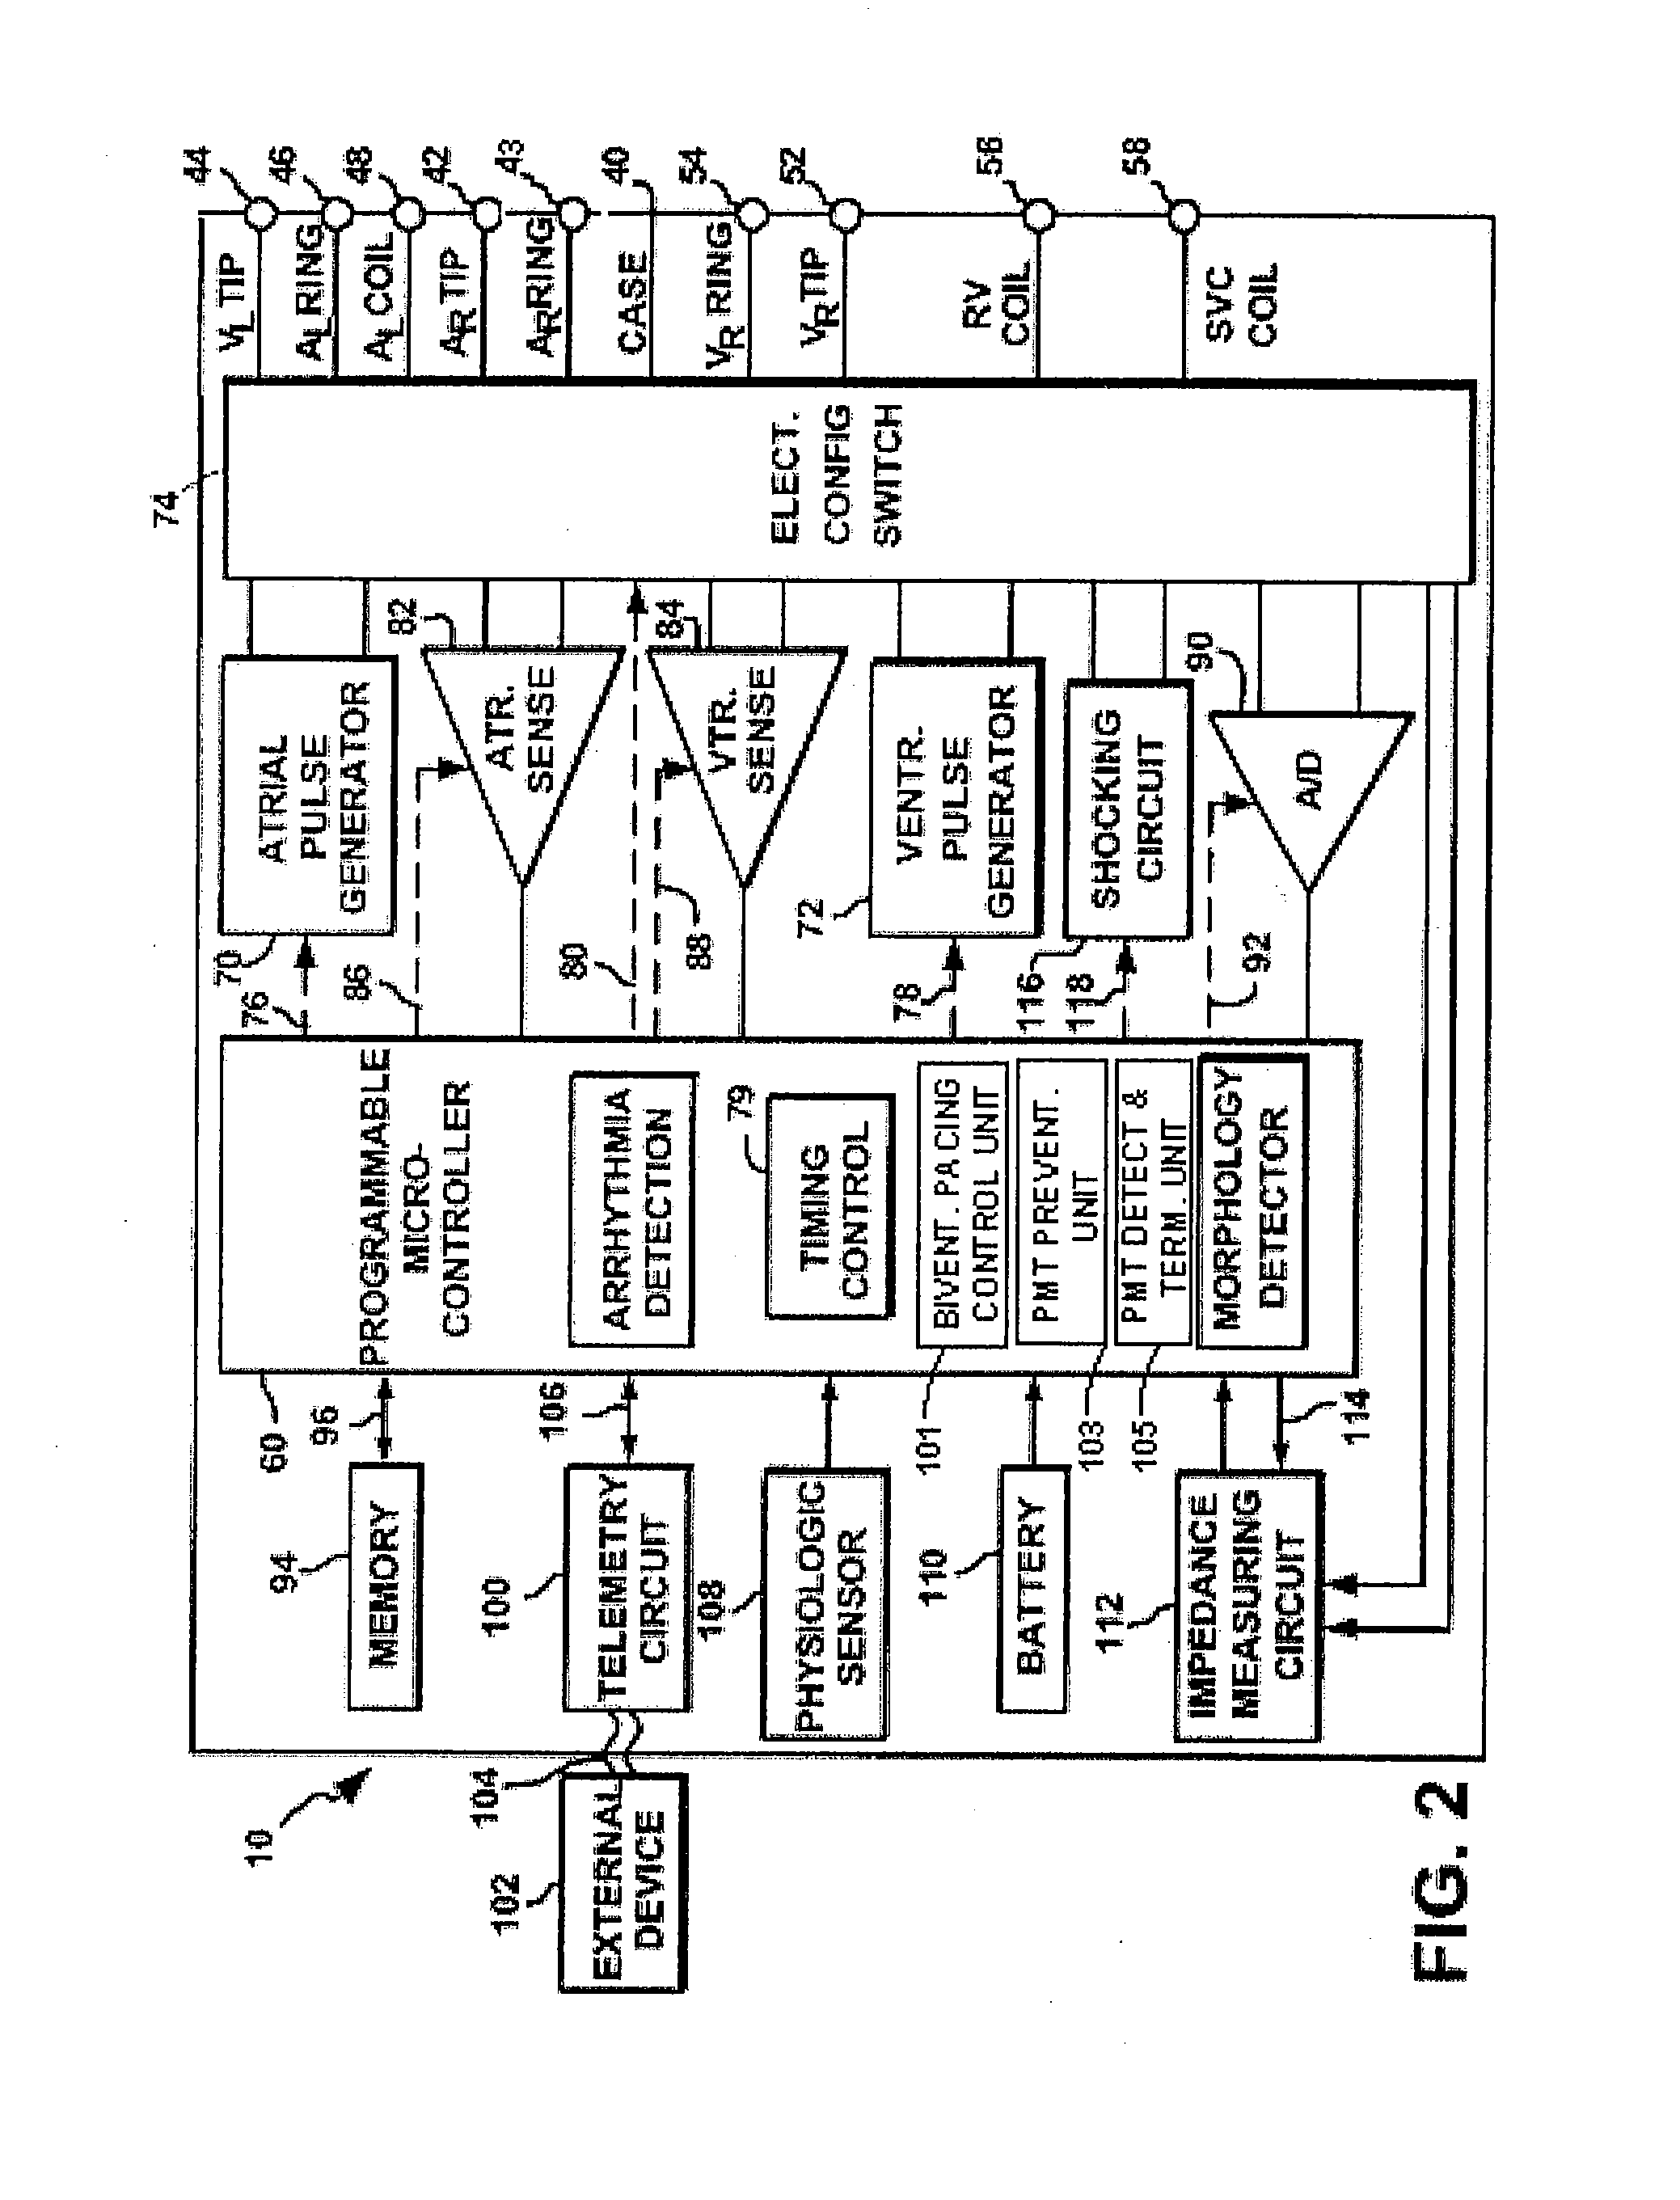 Systems and methods for preventing, detecting, and terminating pacemaker mediated tachycardia in biventricular implantable cardiac stimulation systems